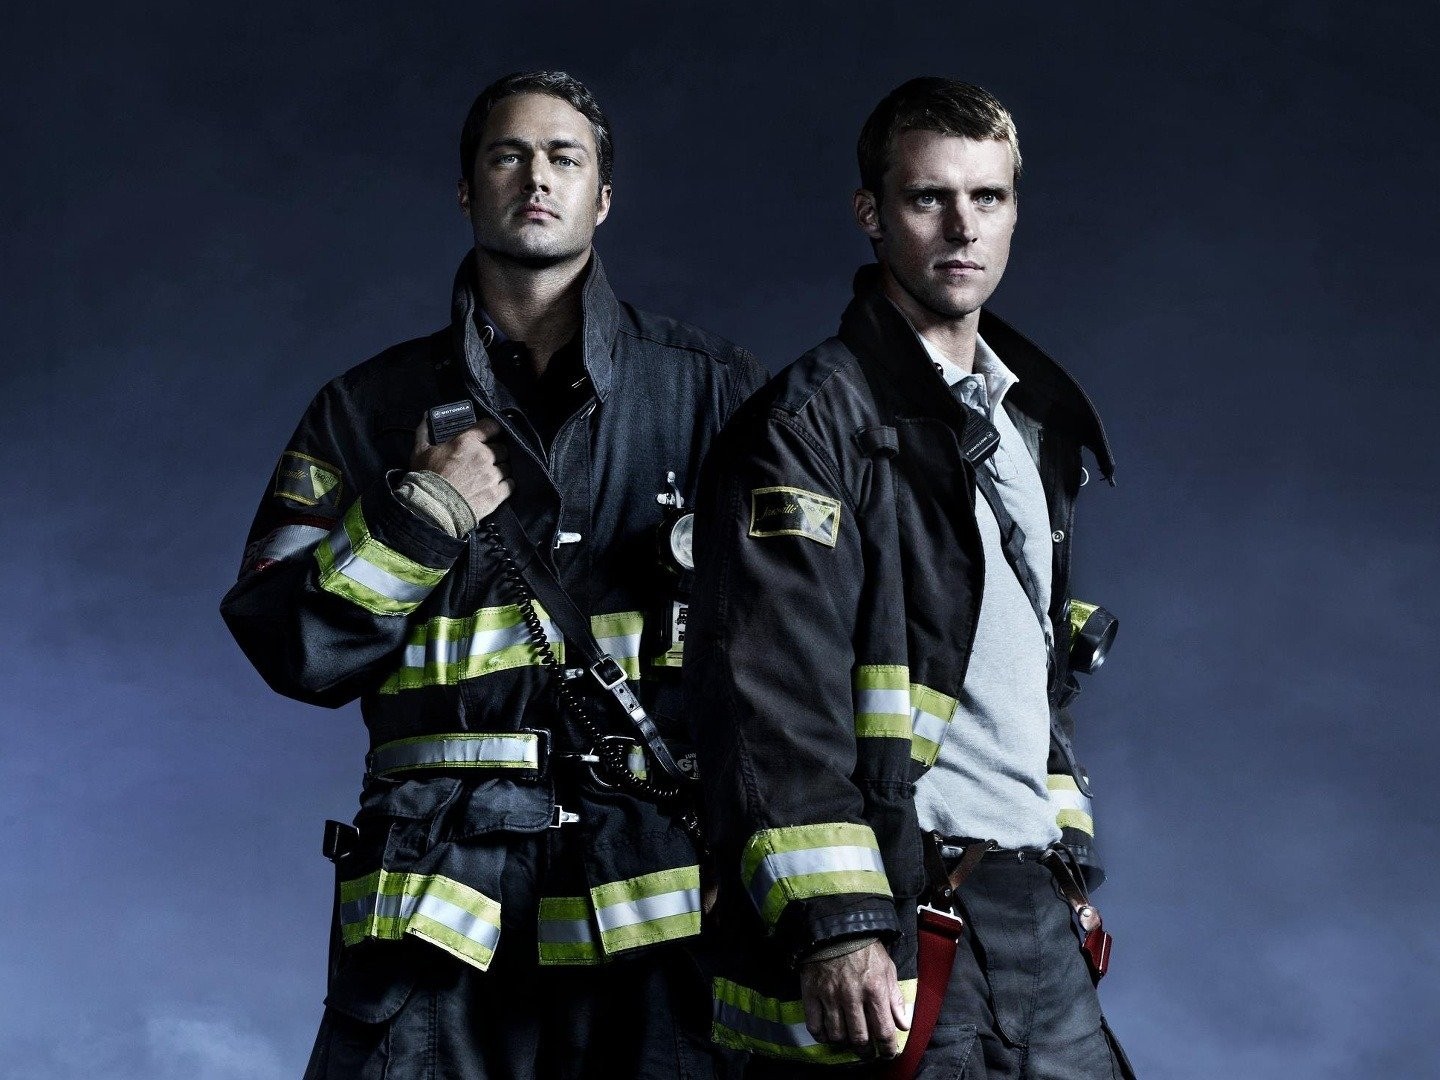 Chicago Fire TV Series Wallpapers 32 images inside